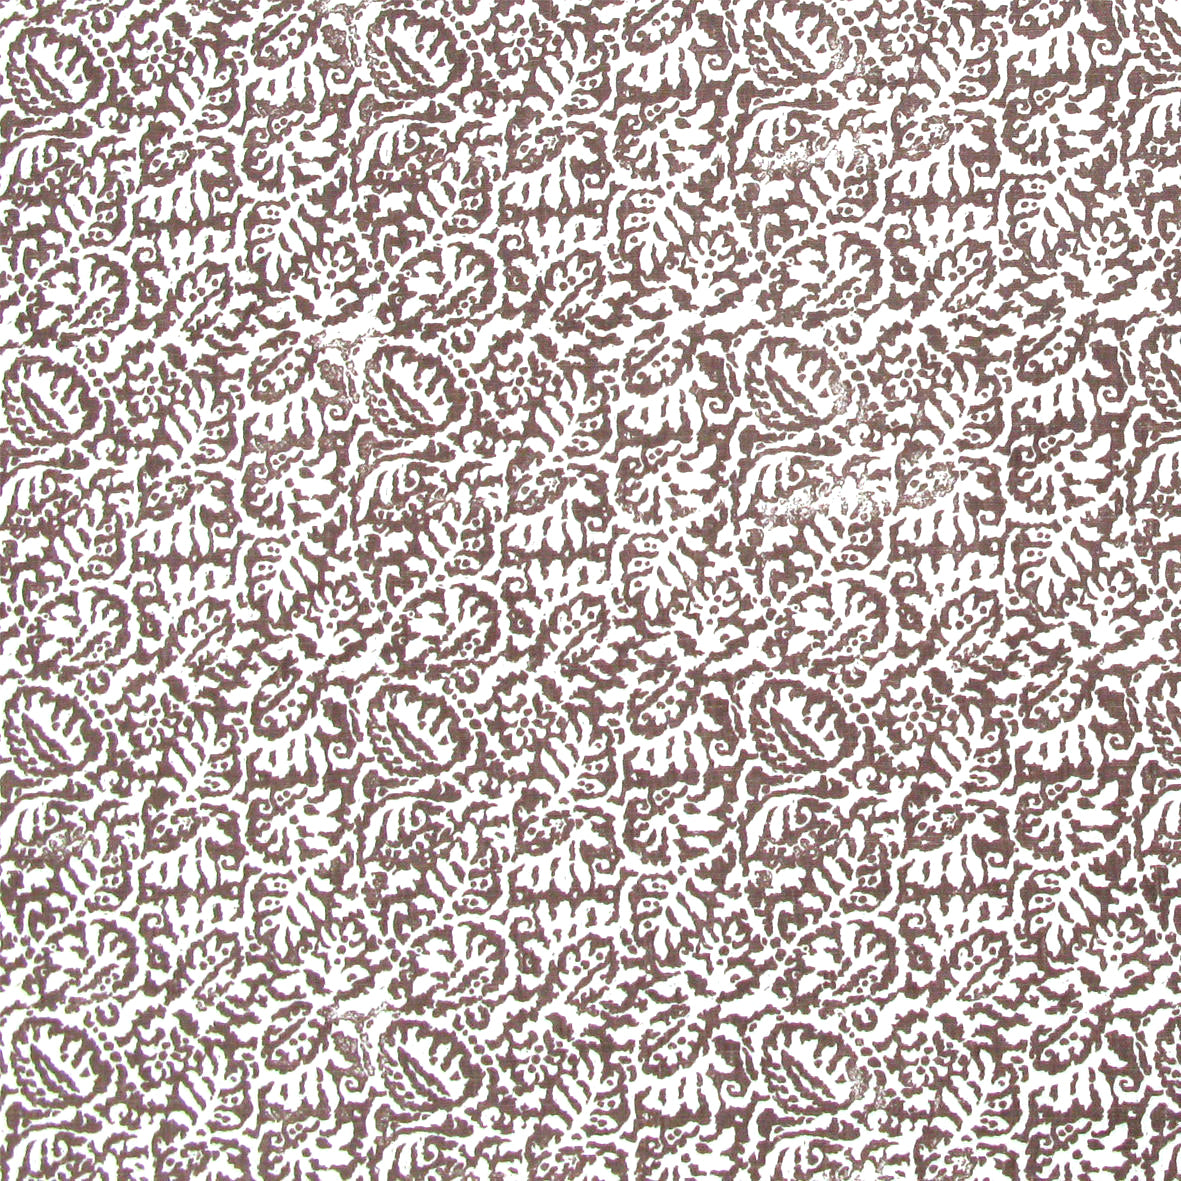 Detail of fabric in a dense paisley print in white on a mottled brown field.